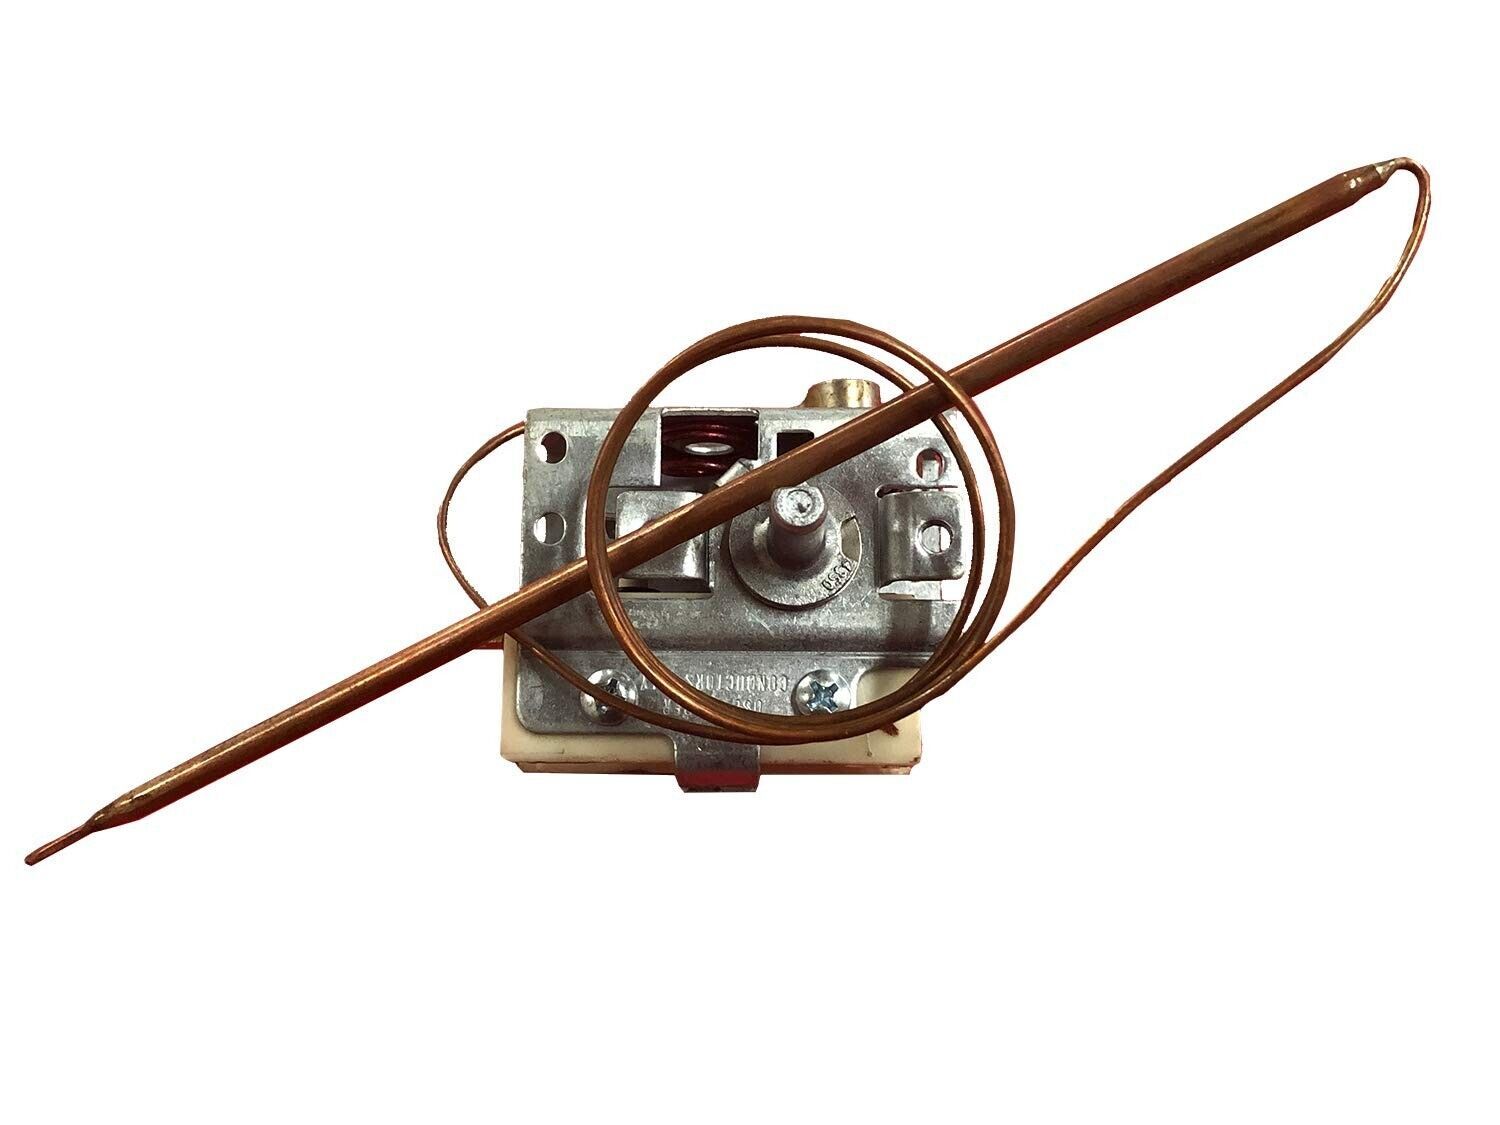 OEM Oven Thermostat For Kenmore 79071022102 Tappan 32-2642-23-02 Uni MGF303PGWG - $91.49